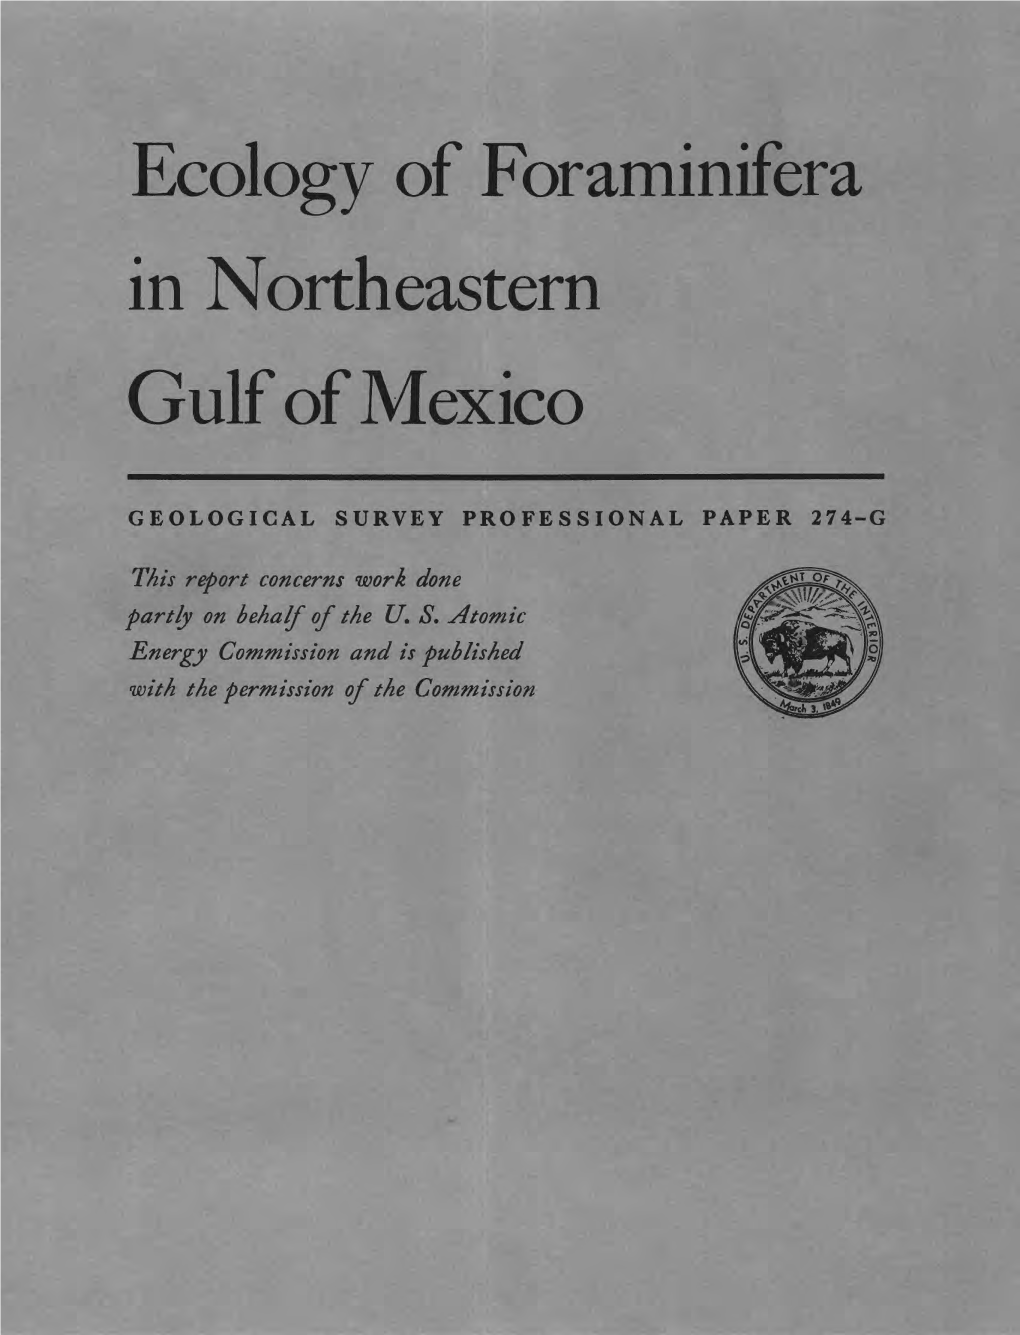 Ecology of Foraminifera in Northeastern Gulf of Mexico